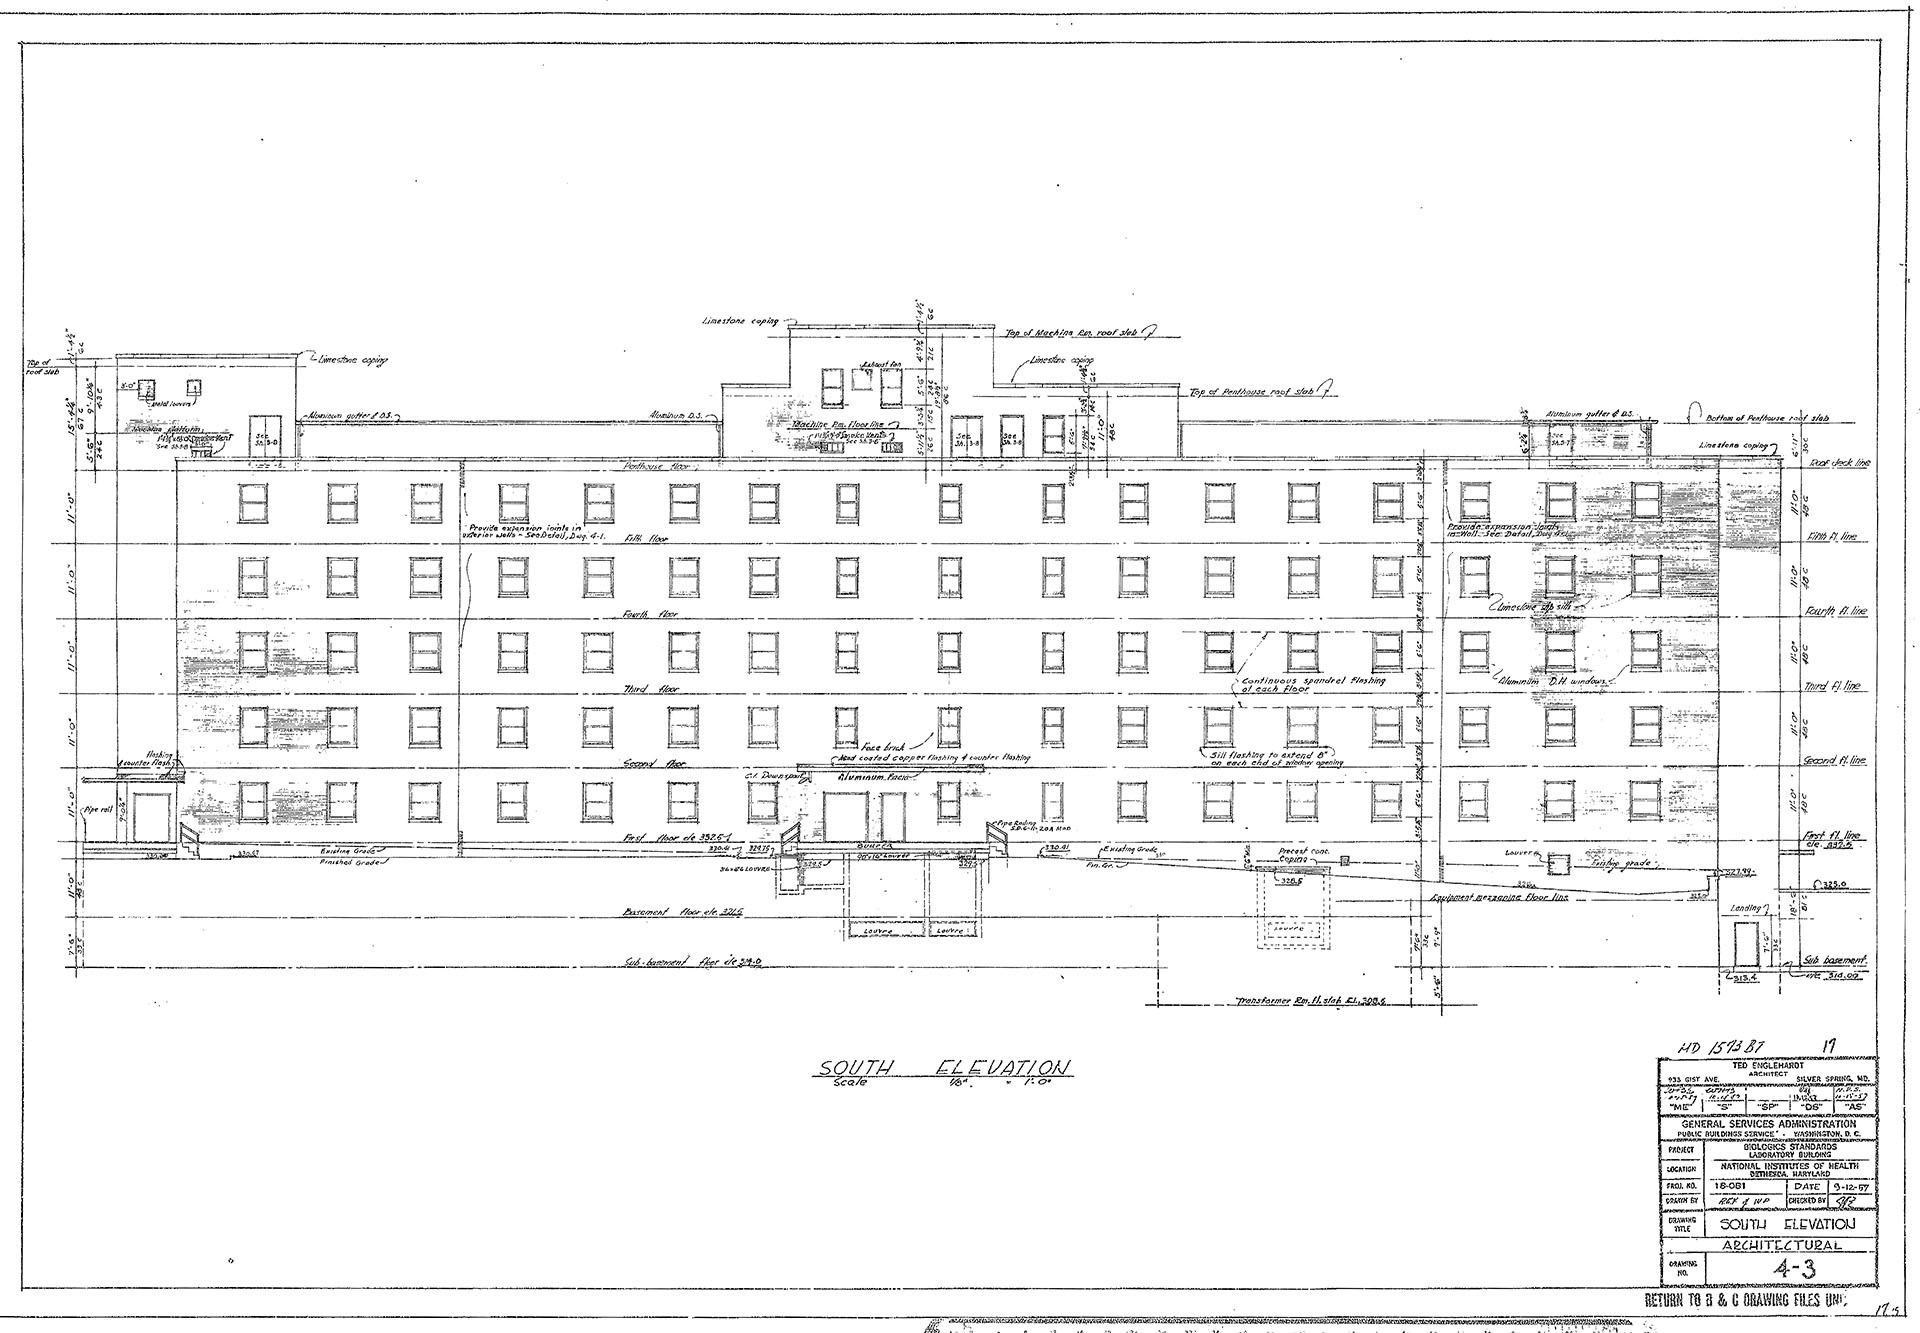 Rear (south) elevation drawing